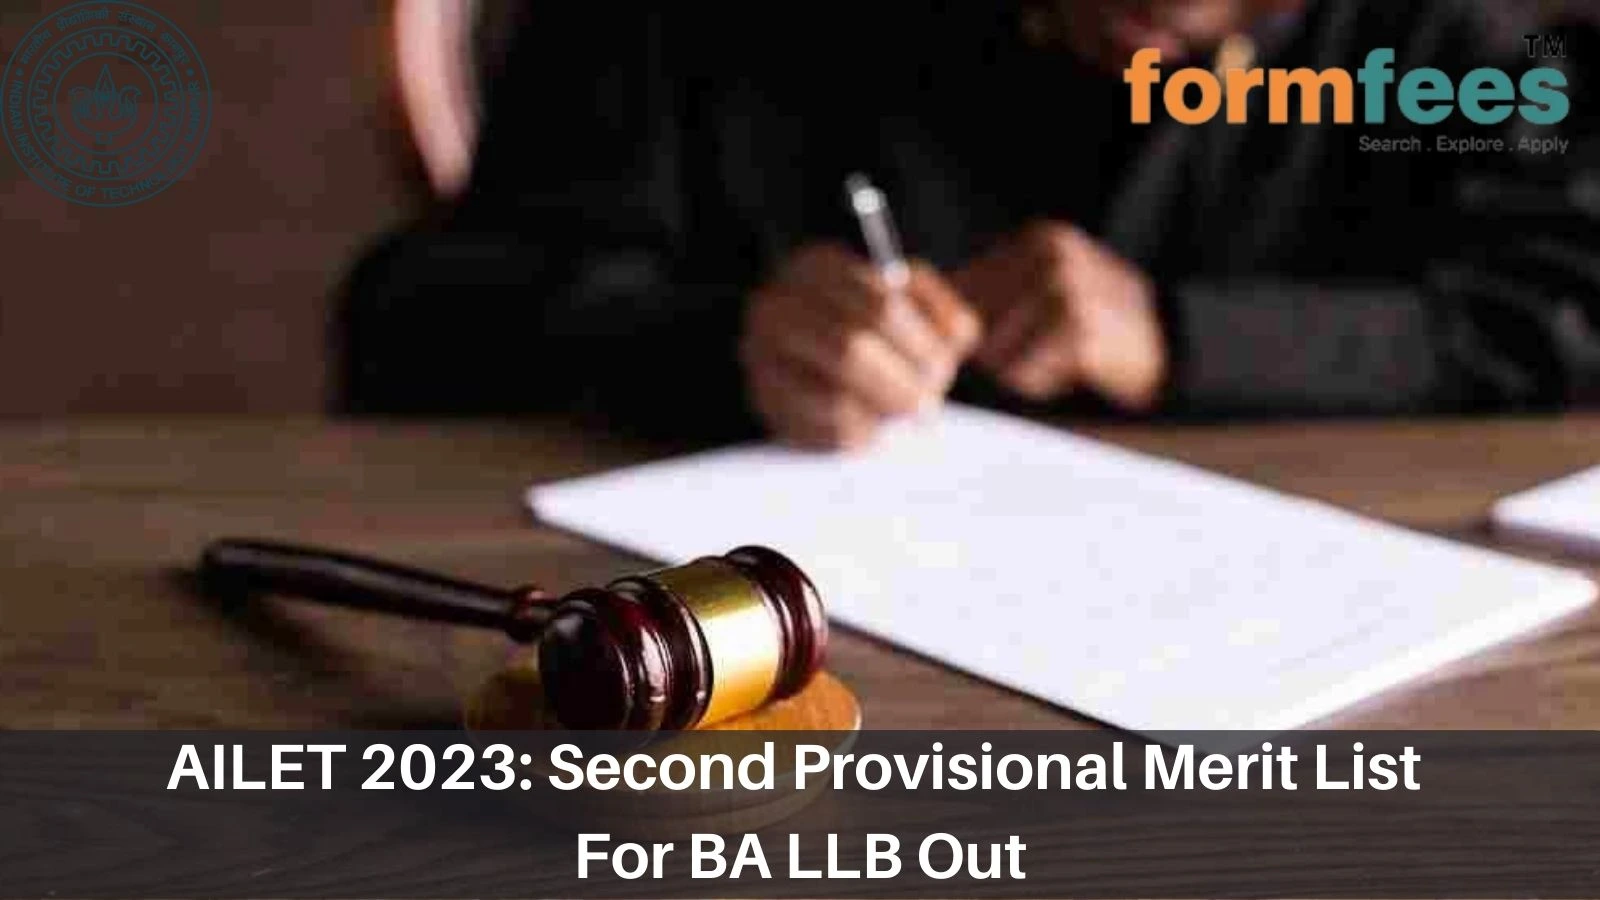 AILET 2023: Second Provisional Merit List For BA LLB Out